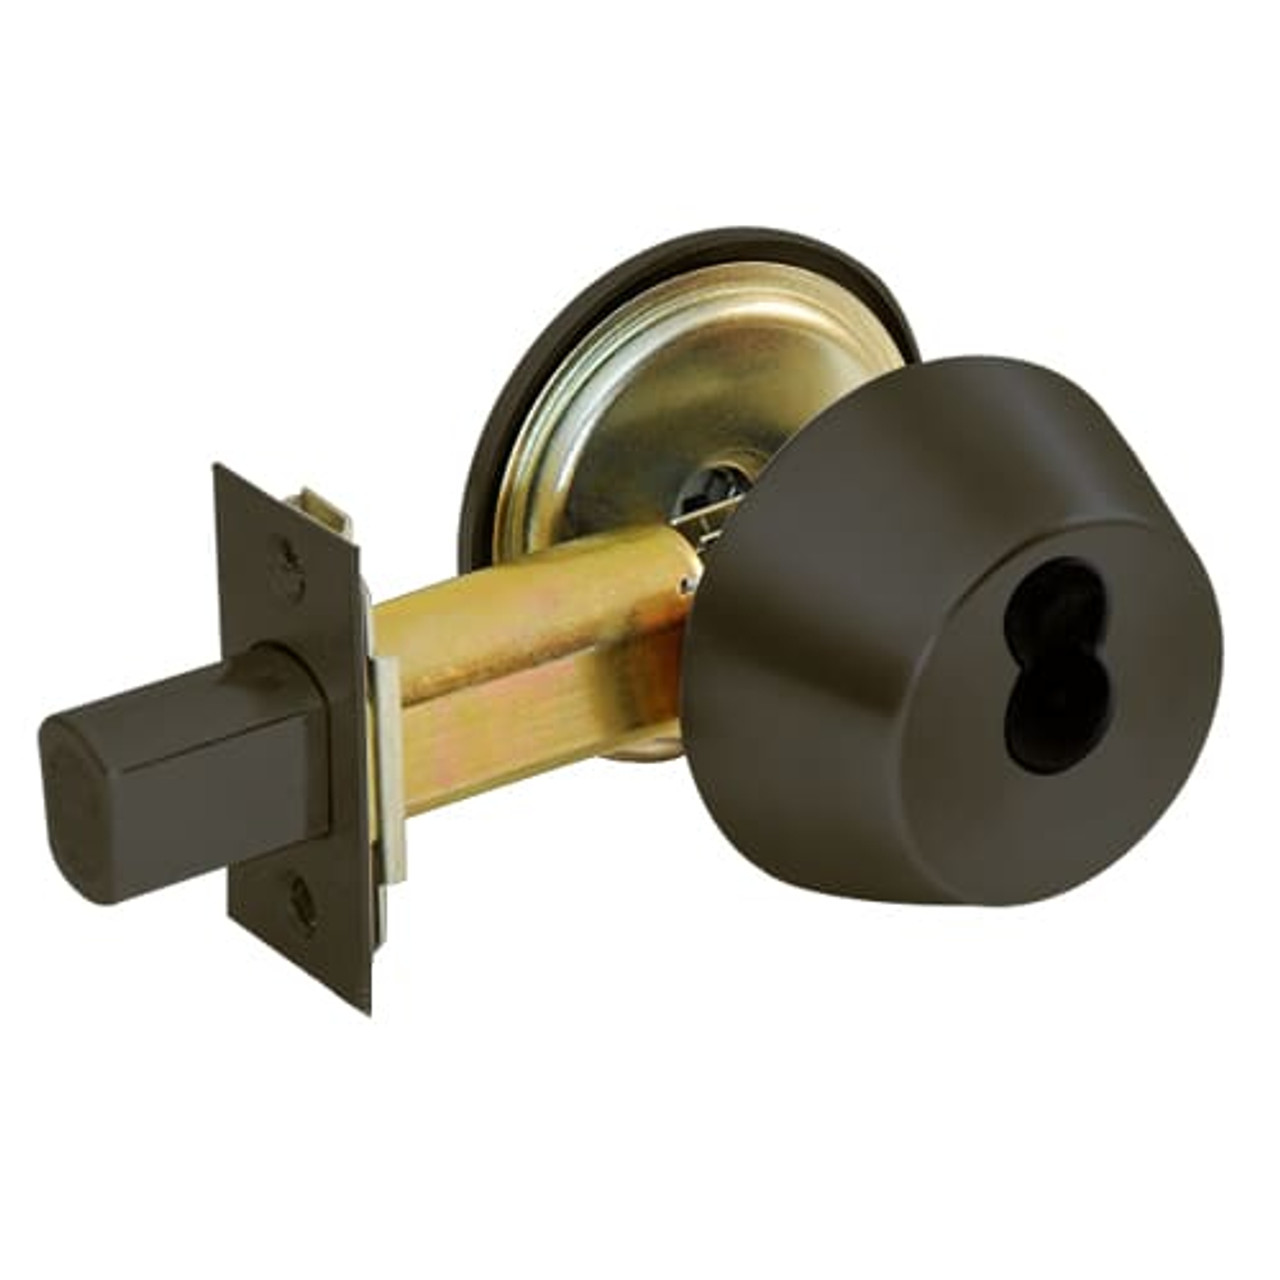 DL2211-613-CL6 Corbin DL2200 Series IC 6-Pin Less Core Cylindrical Deadlocks with Single Cylinder w/ Blank Plate in Oil Rubbed Bronze Finish